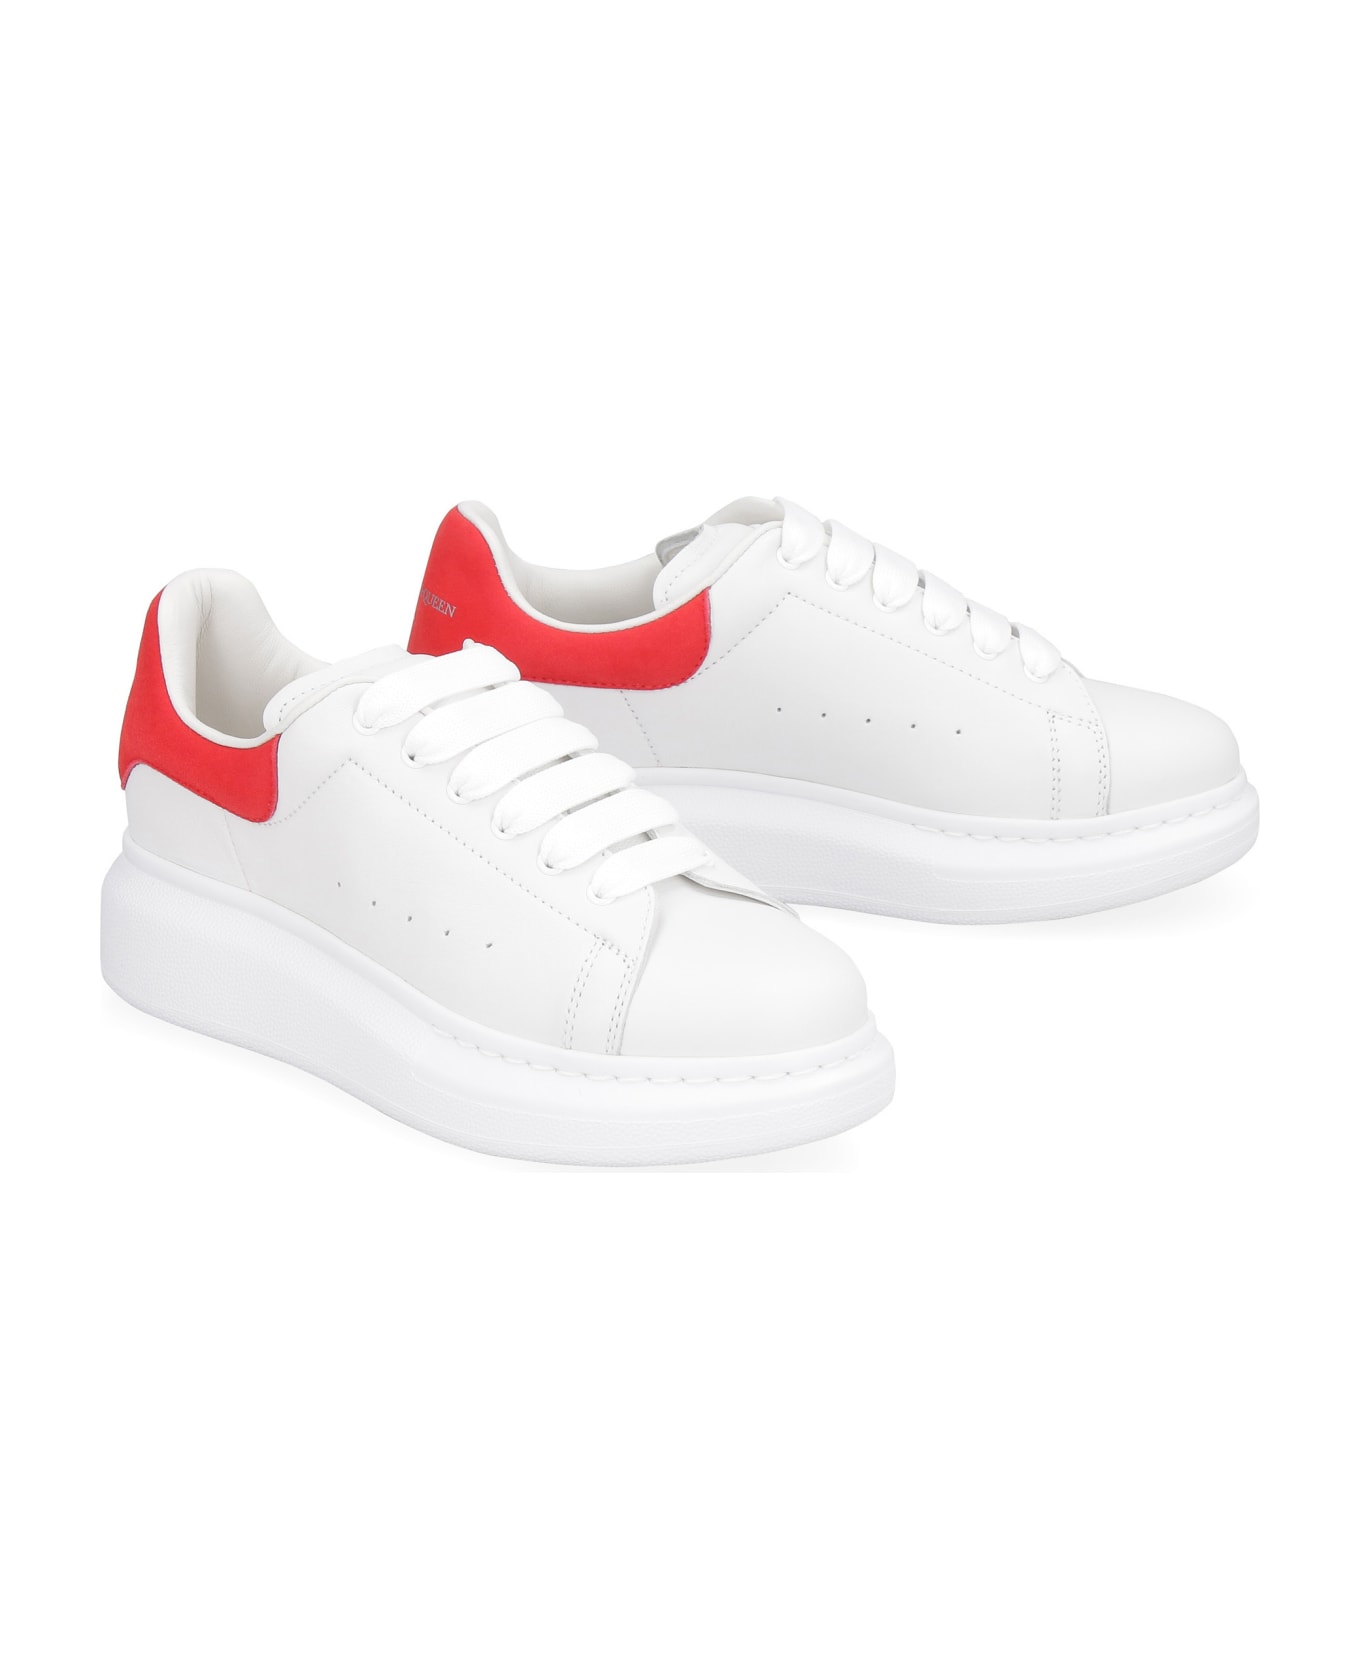 Alexander McQueen Molly Leather Sneakers - White